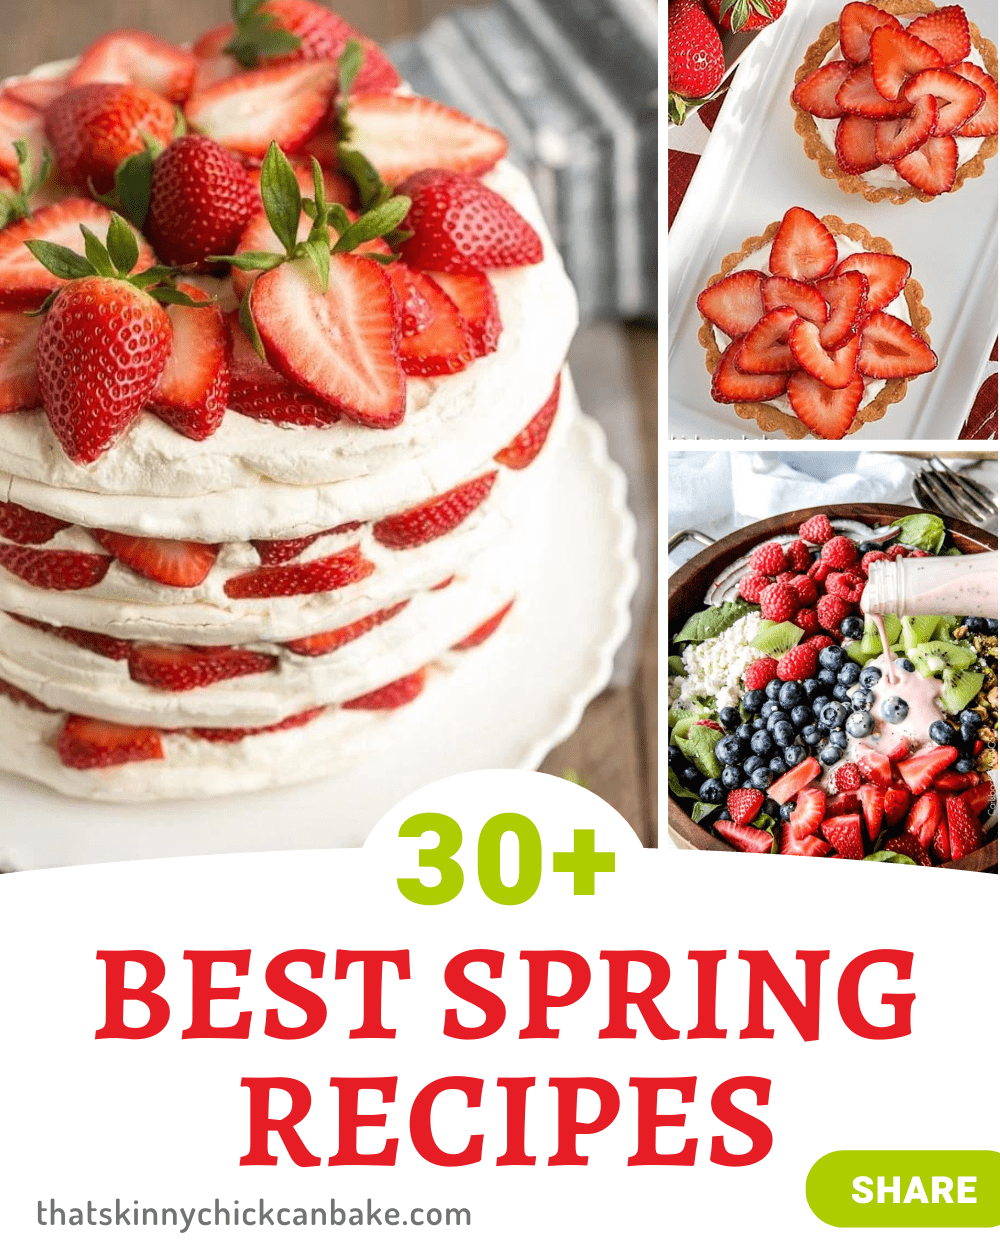 30+ Best spring recipes collage.